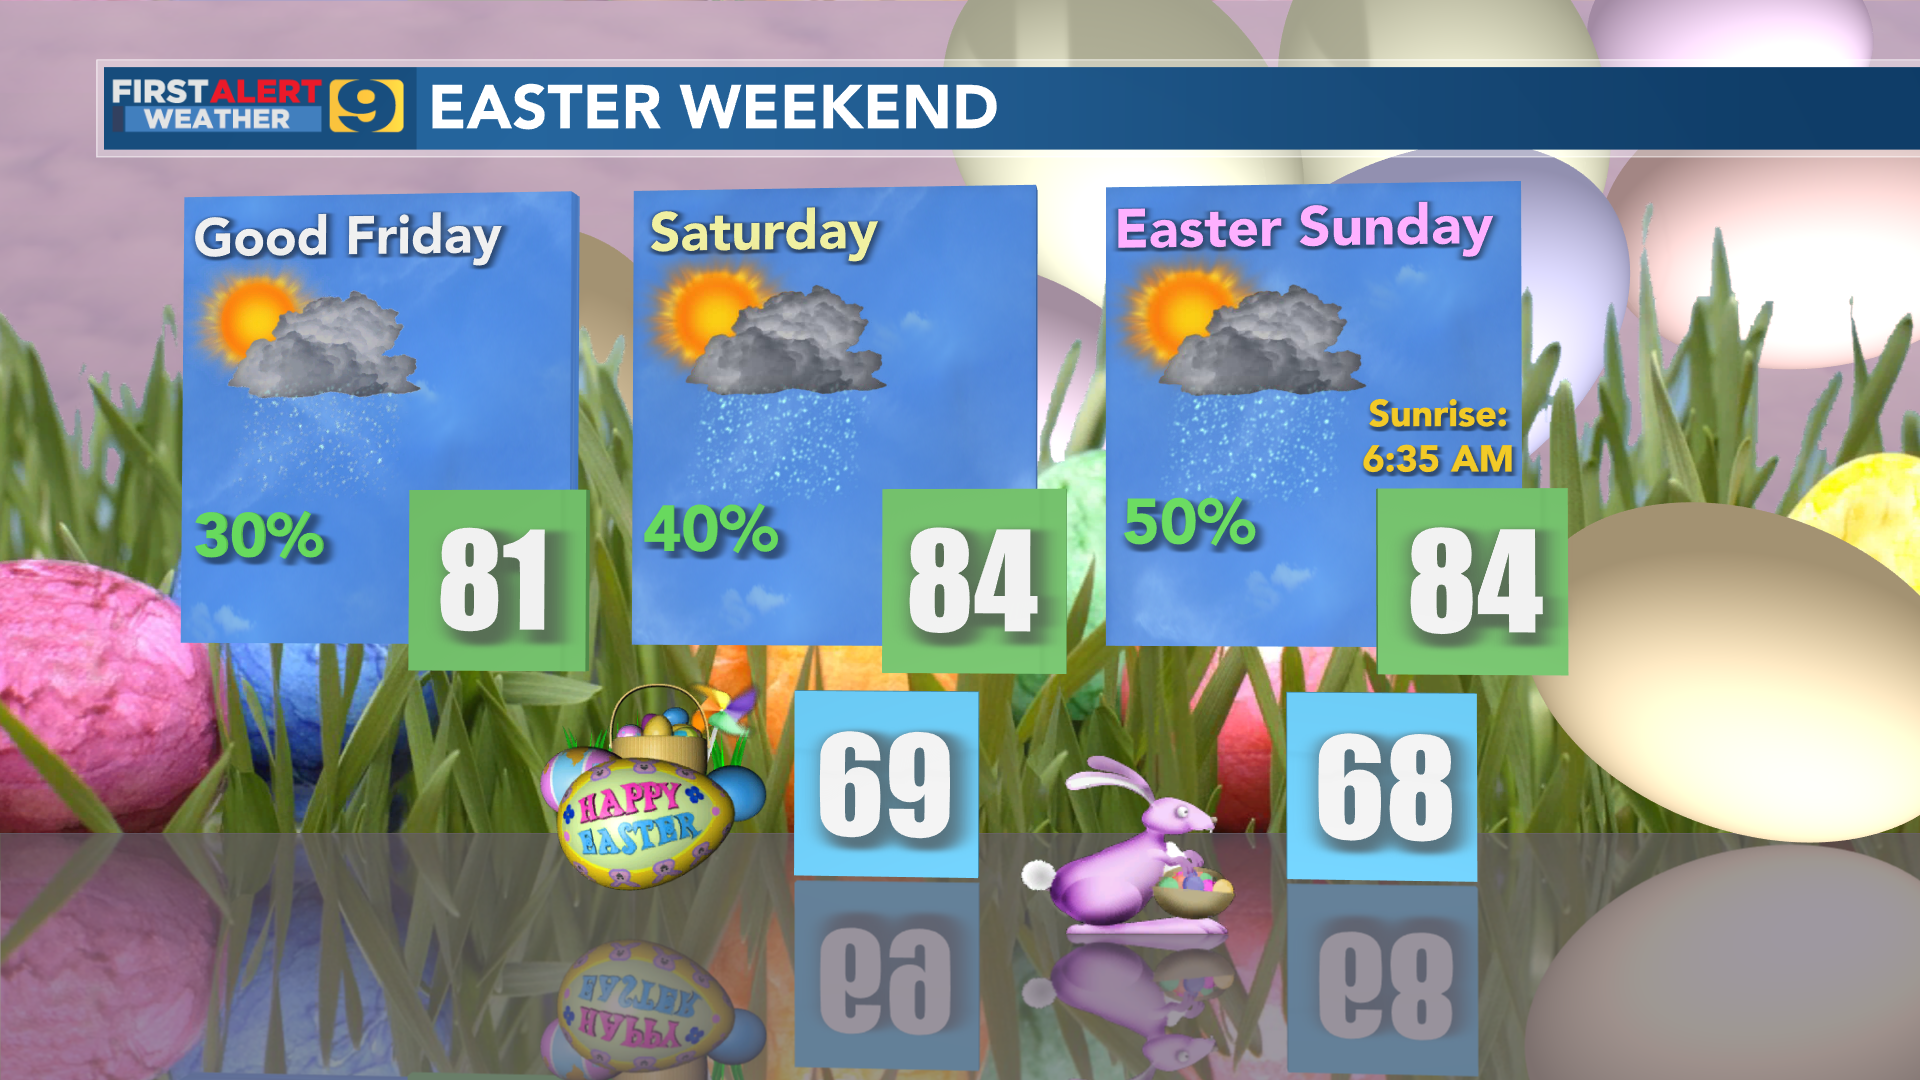 Be ready for a few showers for both Saturday, Easter Sunday afternoons